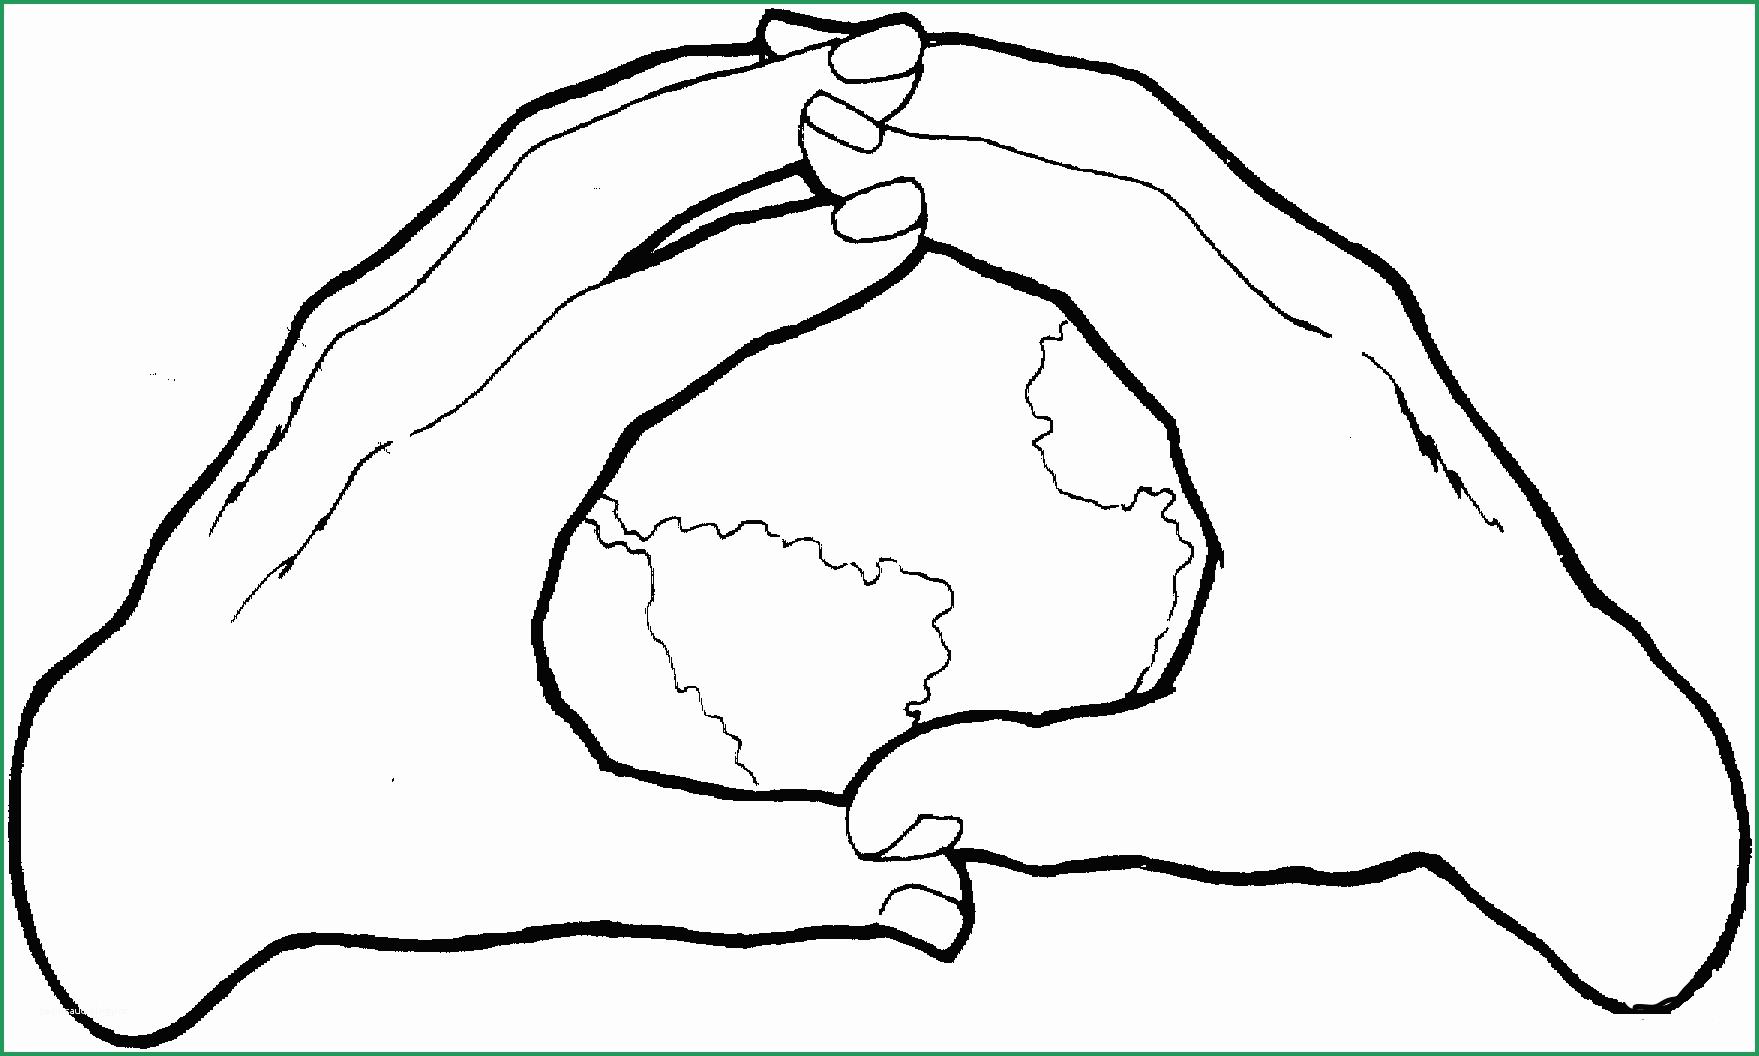 Save The Earth Coloring Pages Coloring Ideas Save The Earth Coloring Pages Fabulous Freee Day Of